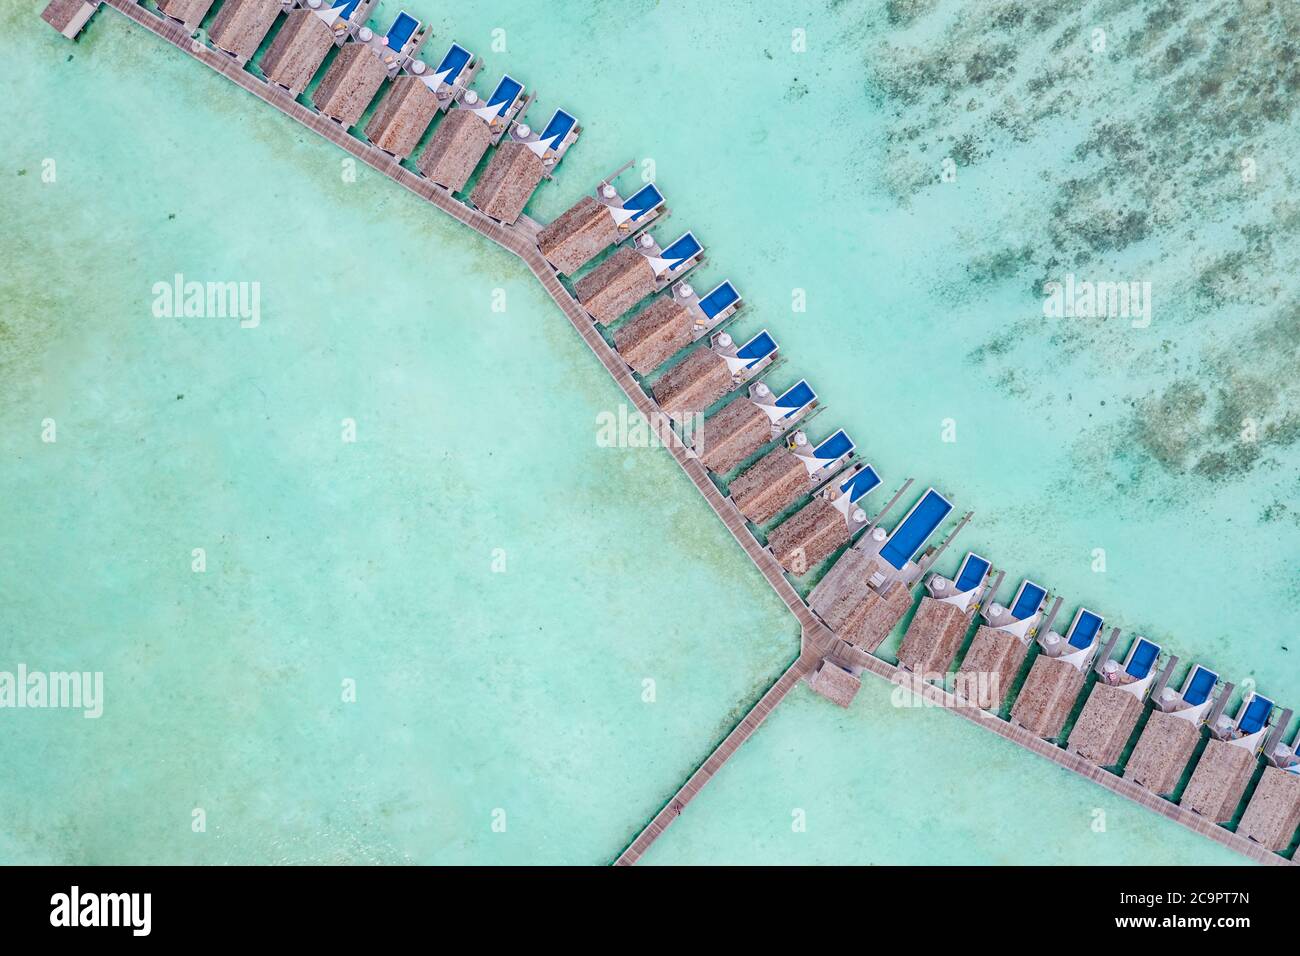 Amazing bird eyes view in Maldives, landscape seascape aerial view over a Maldives. Landscape, luxury tropical resort or hotel with water villas beach Stock Photo